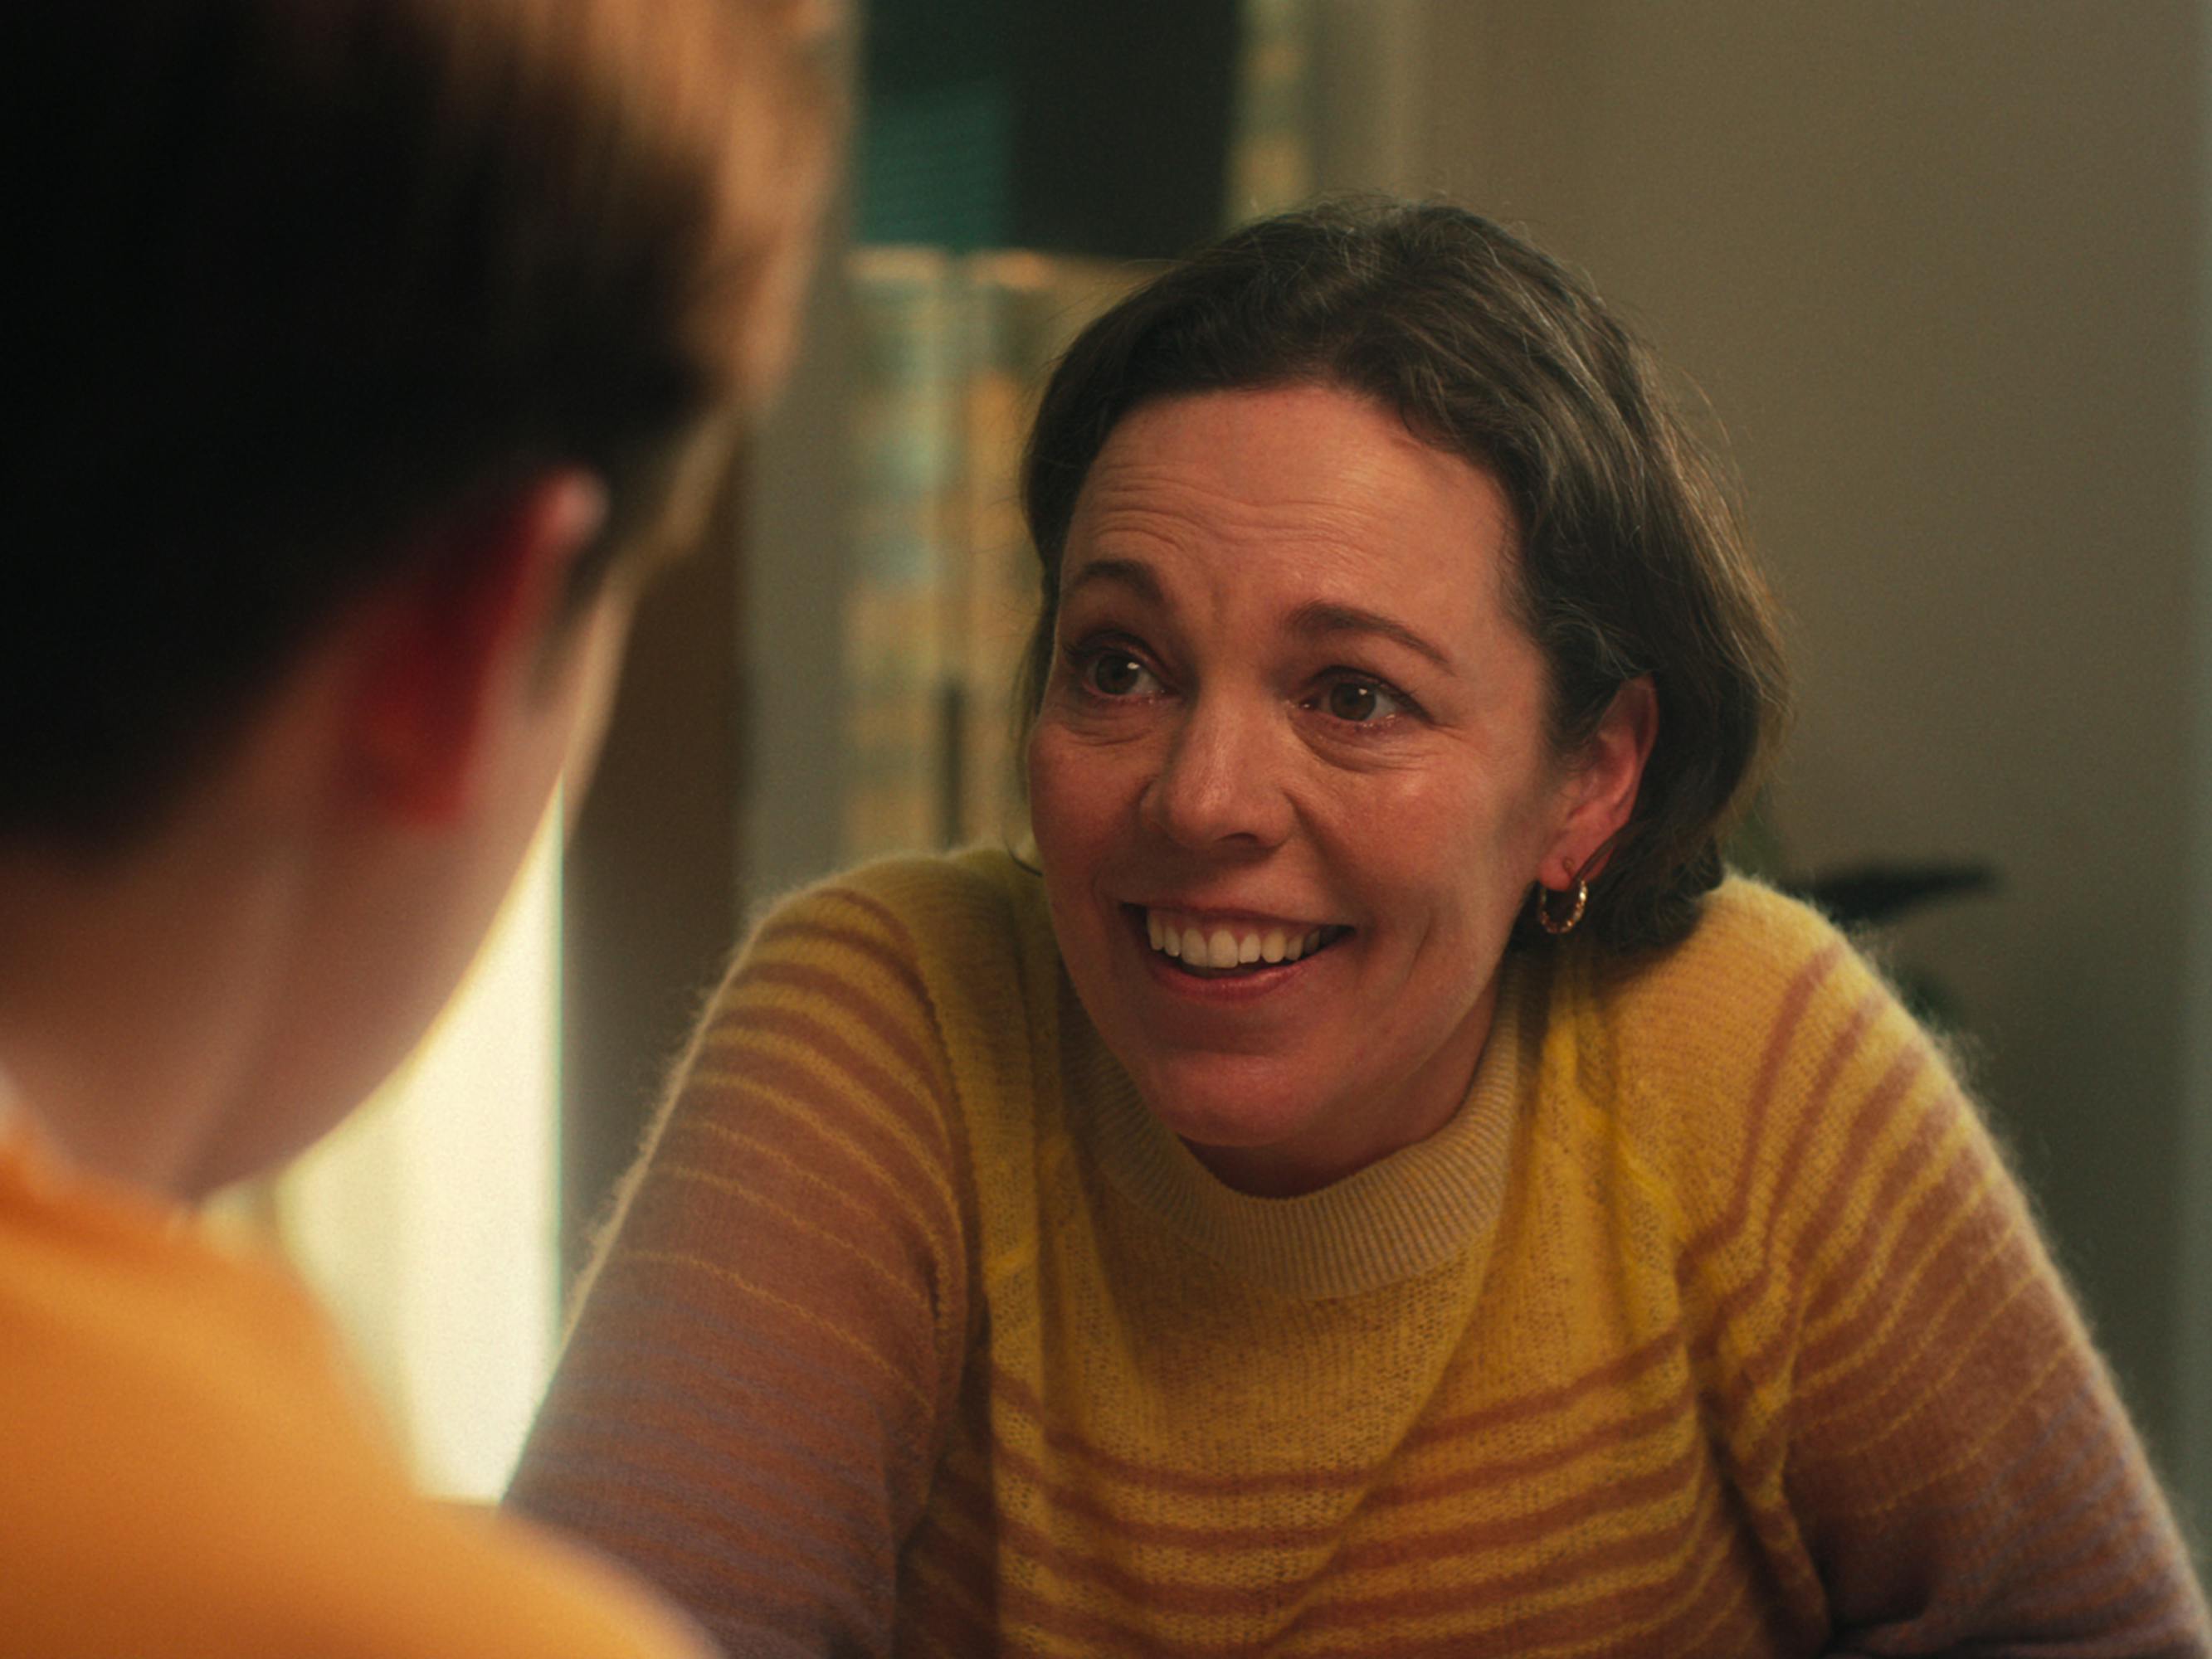 Olivia Colman Smiles in a white and brown striped sweater.